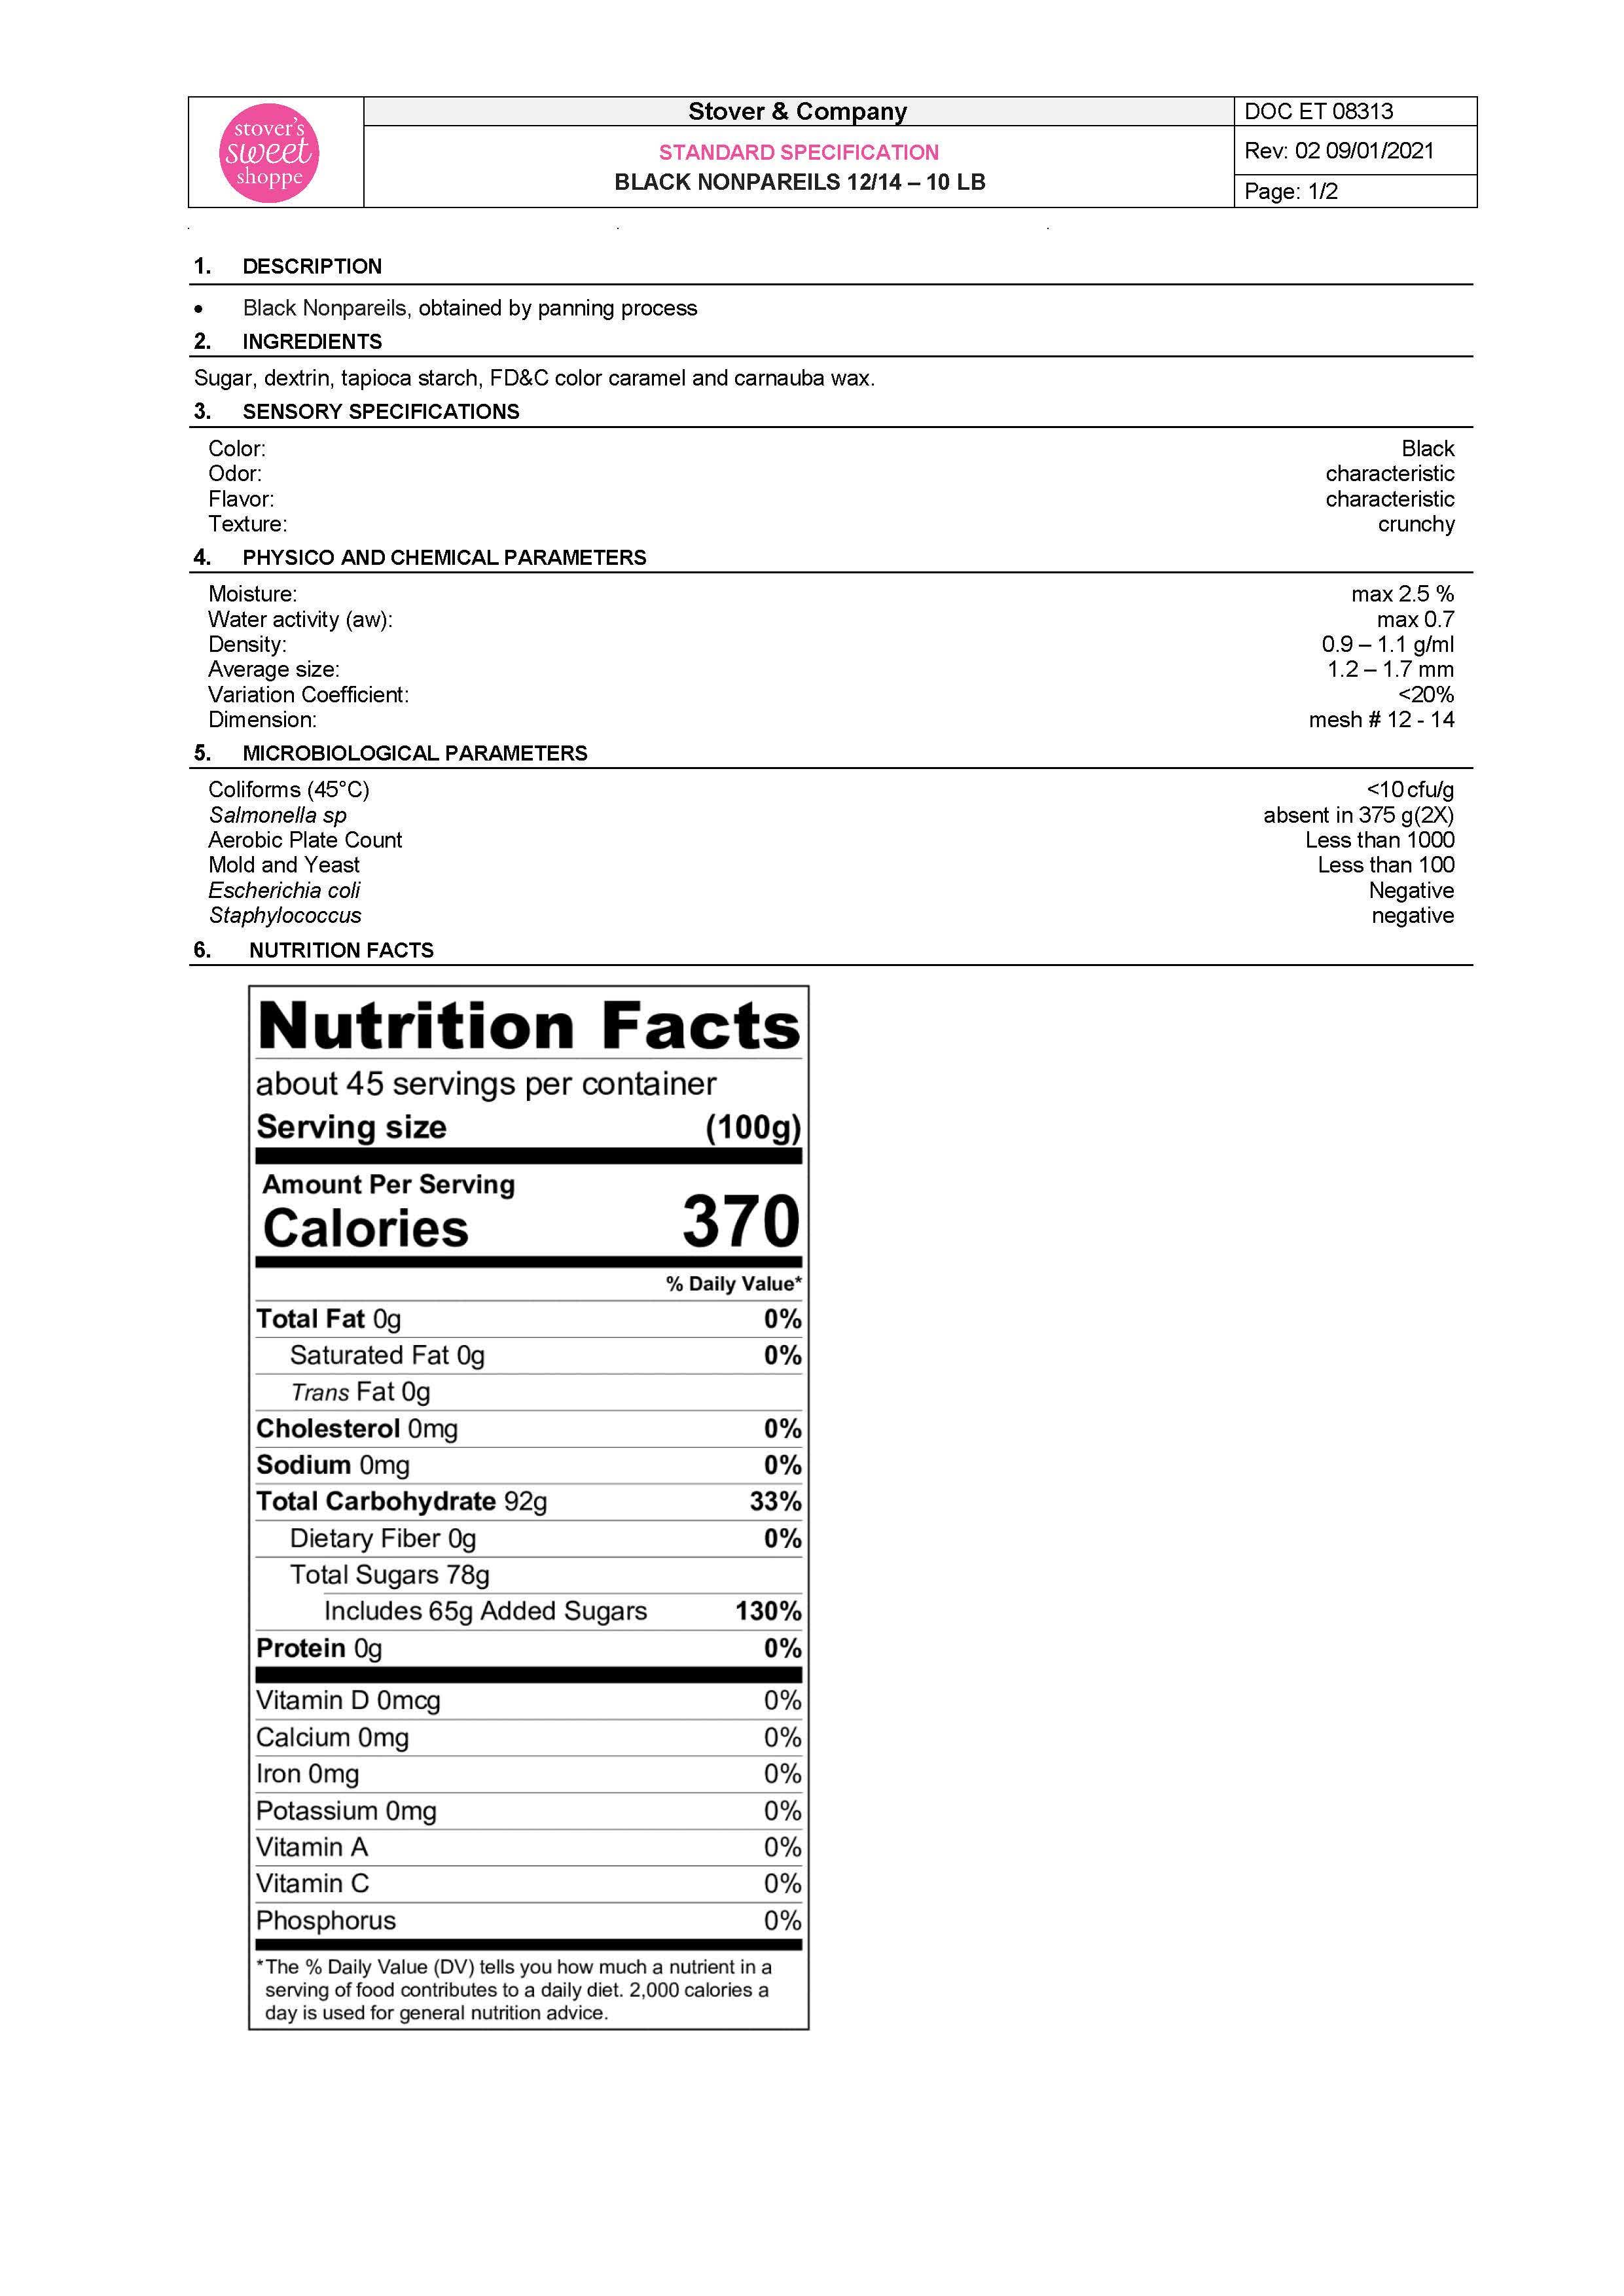 Black Nonpareils Nutritional Info Page 1 by Stover's Sweet Shoppe at Stover & Company